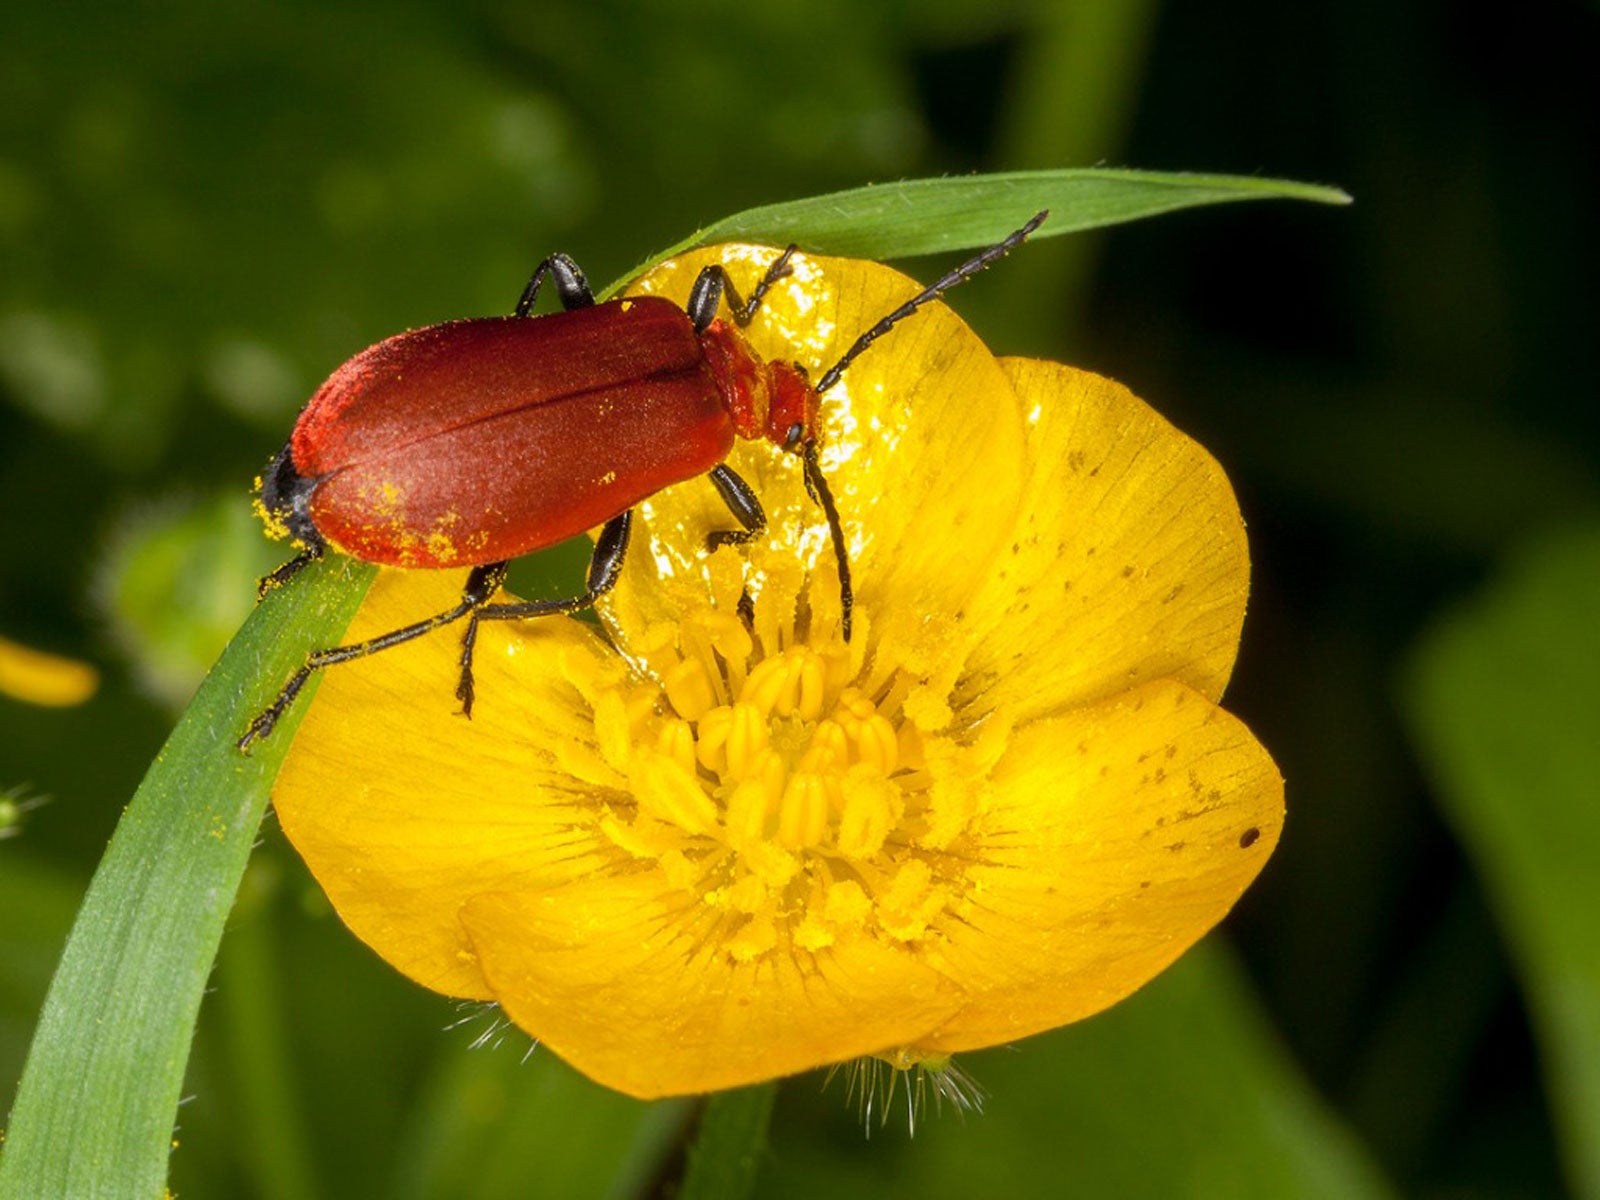 A red beetle on a buttercup flower